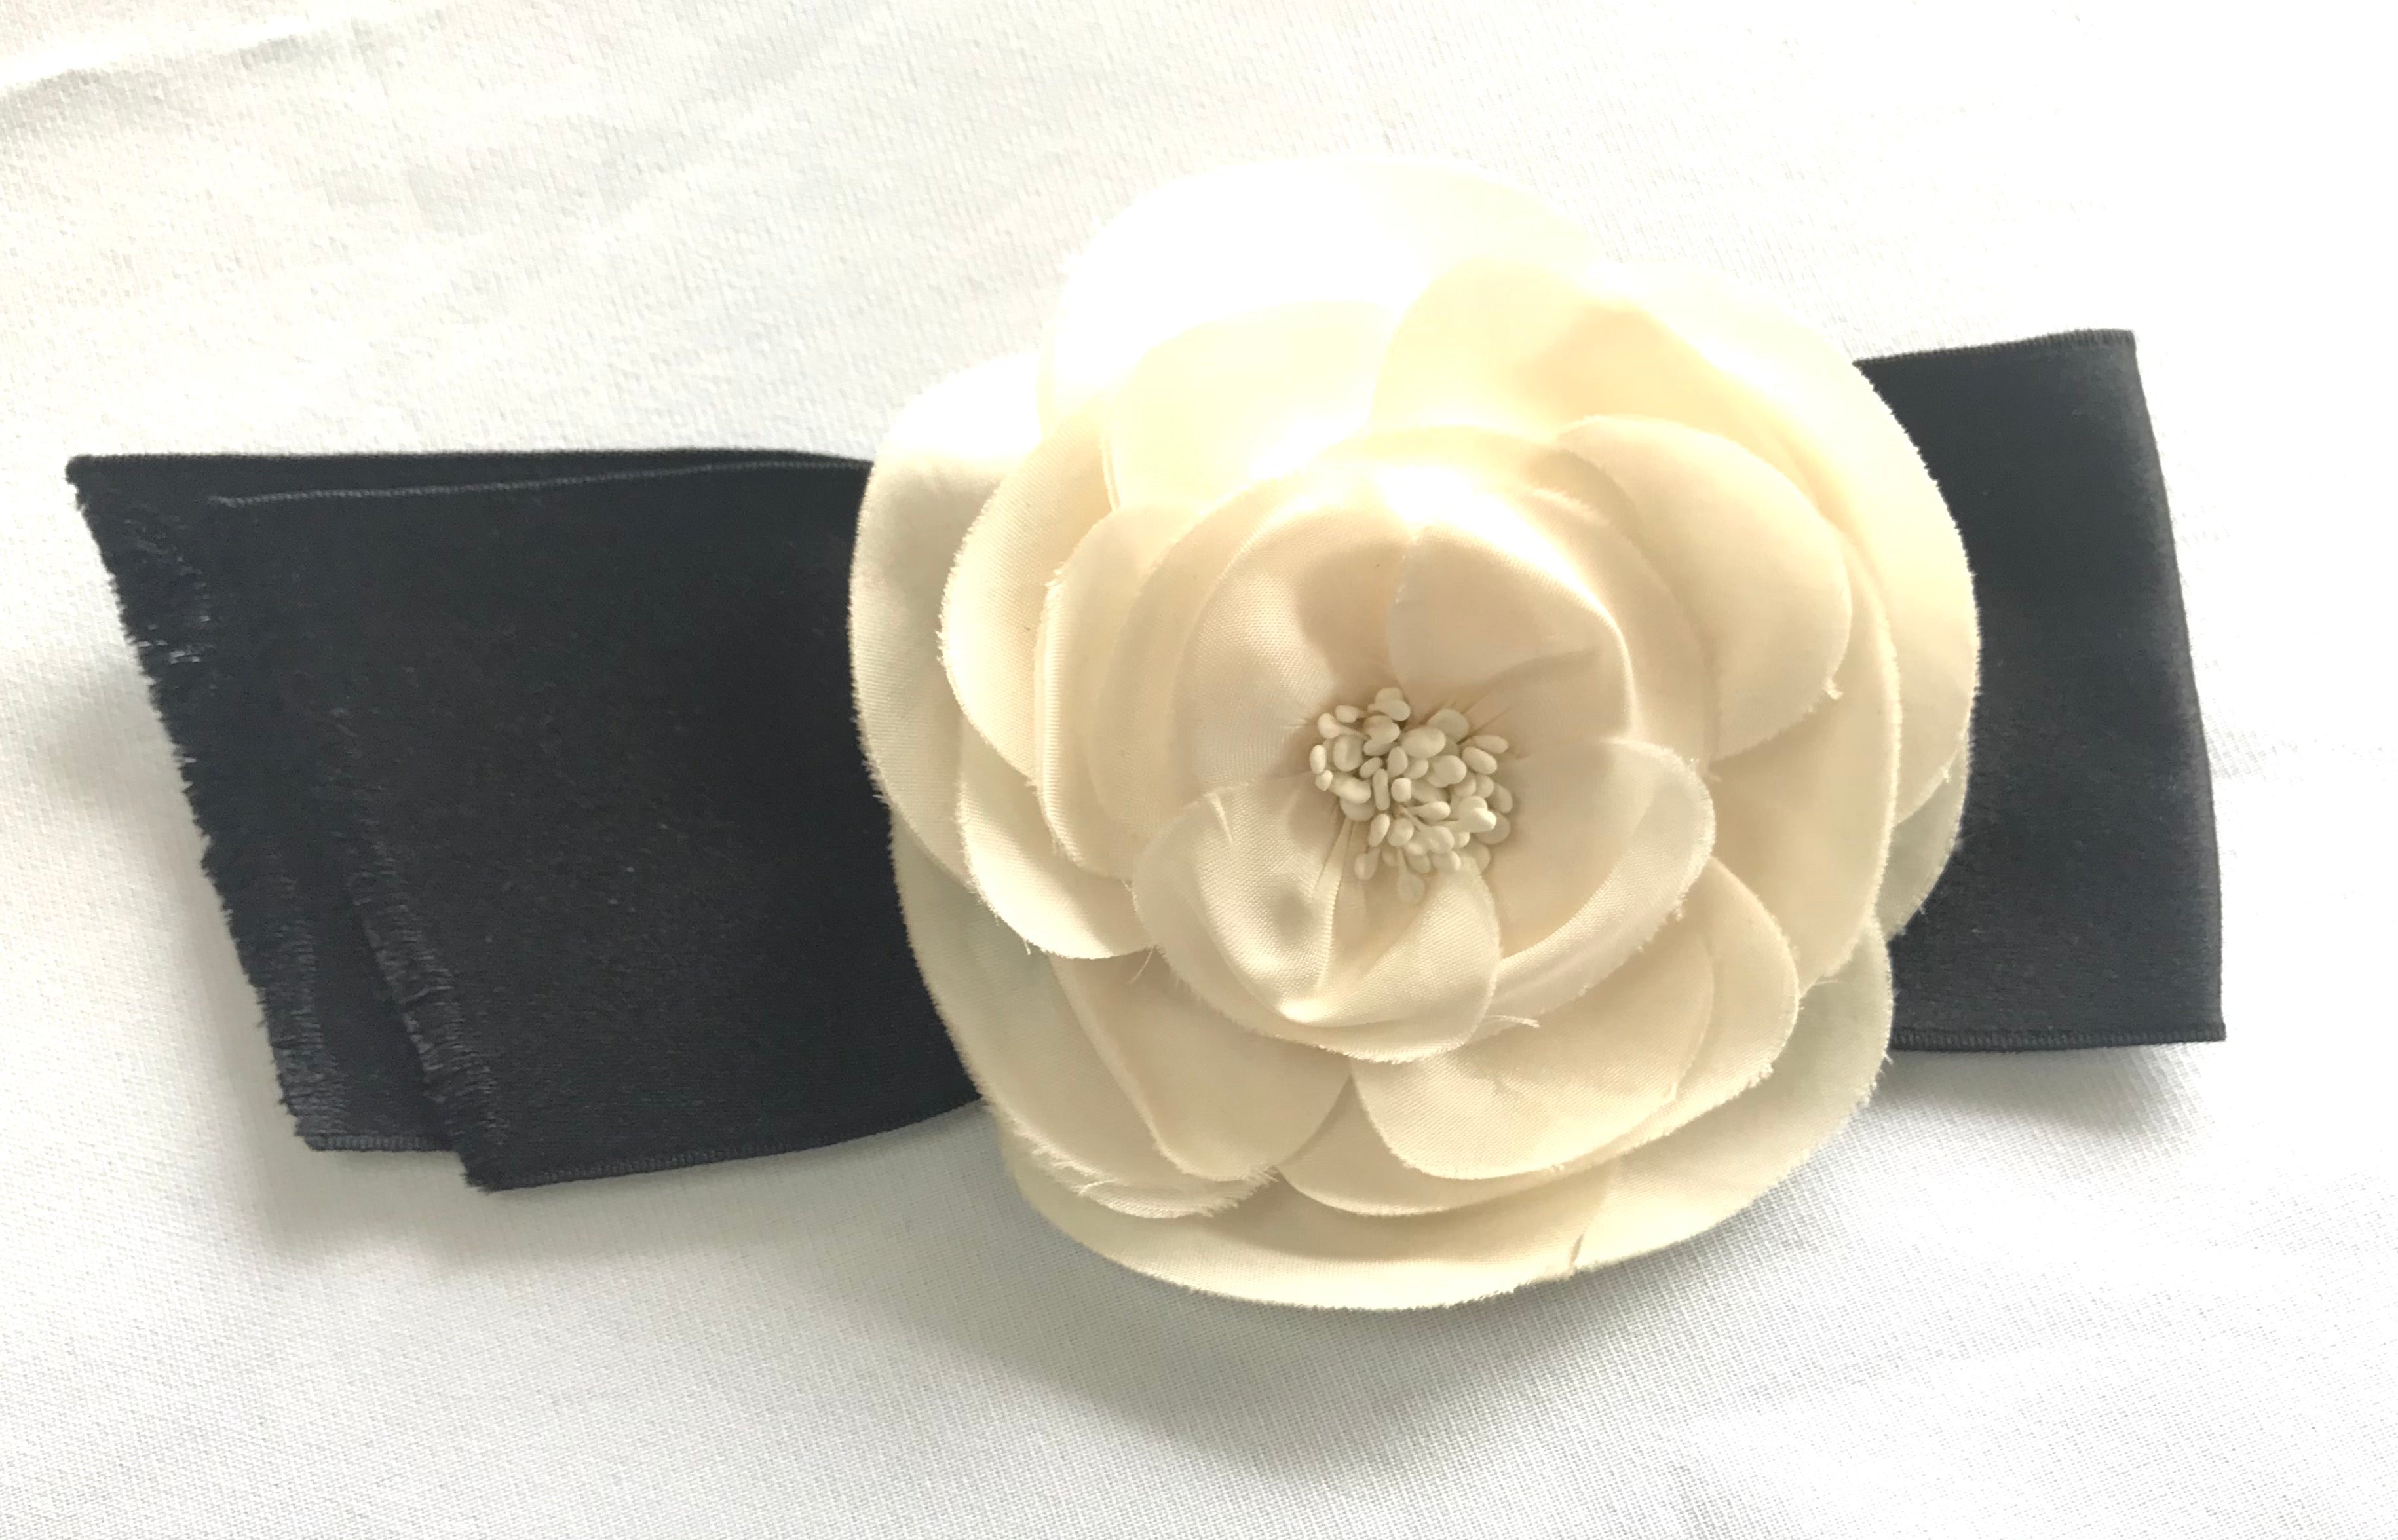 Vintage CHANEL classic ivory camellia and black bow brooch pin